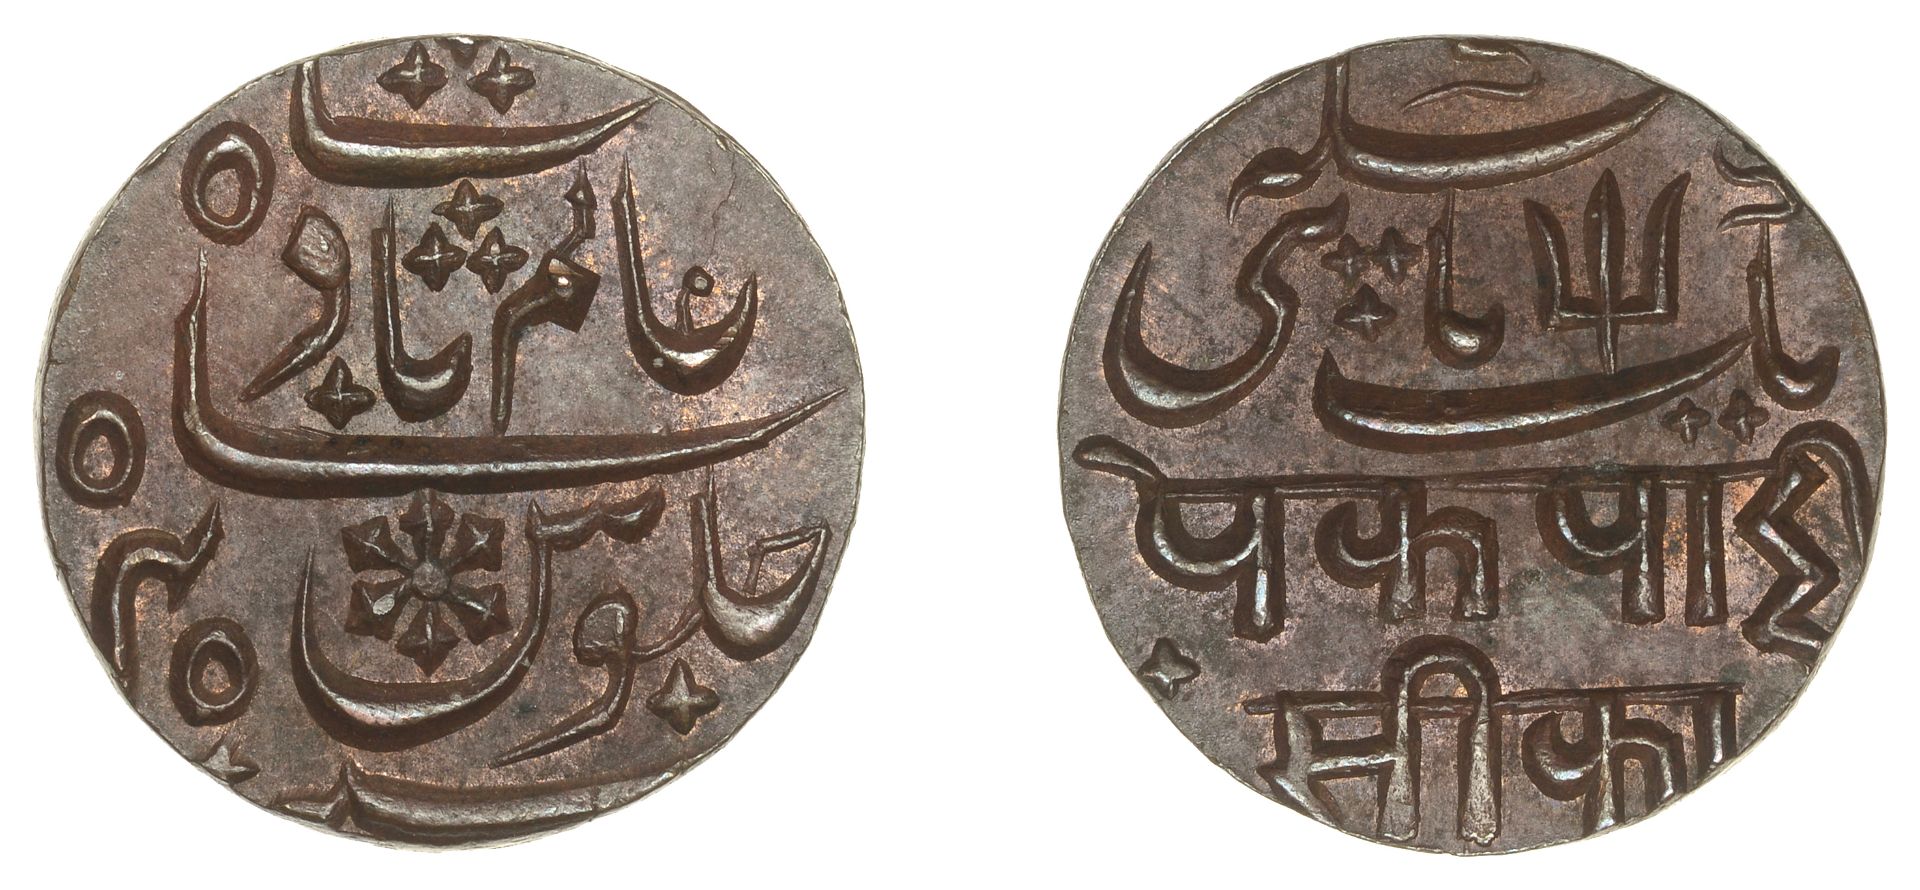 East India Company, Bengal Presidency, Saugor Mint: Third phase, copper Pice in the name of...